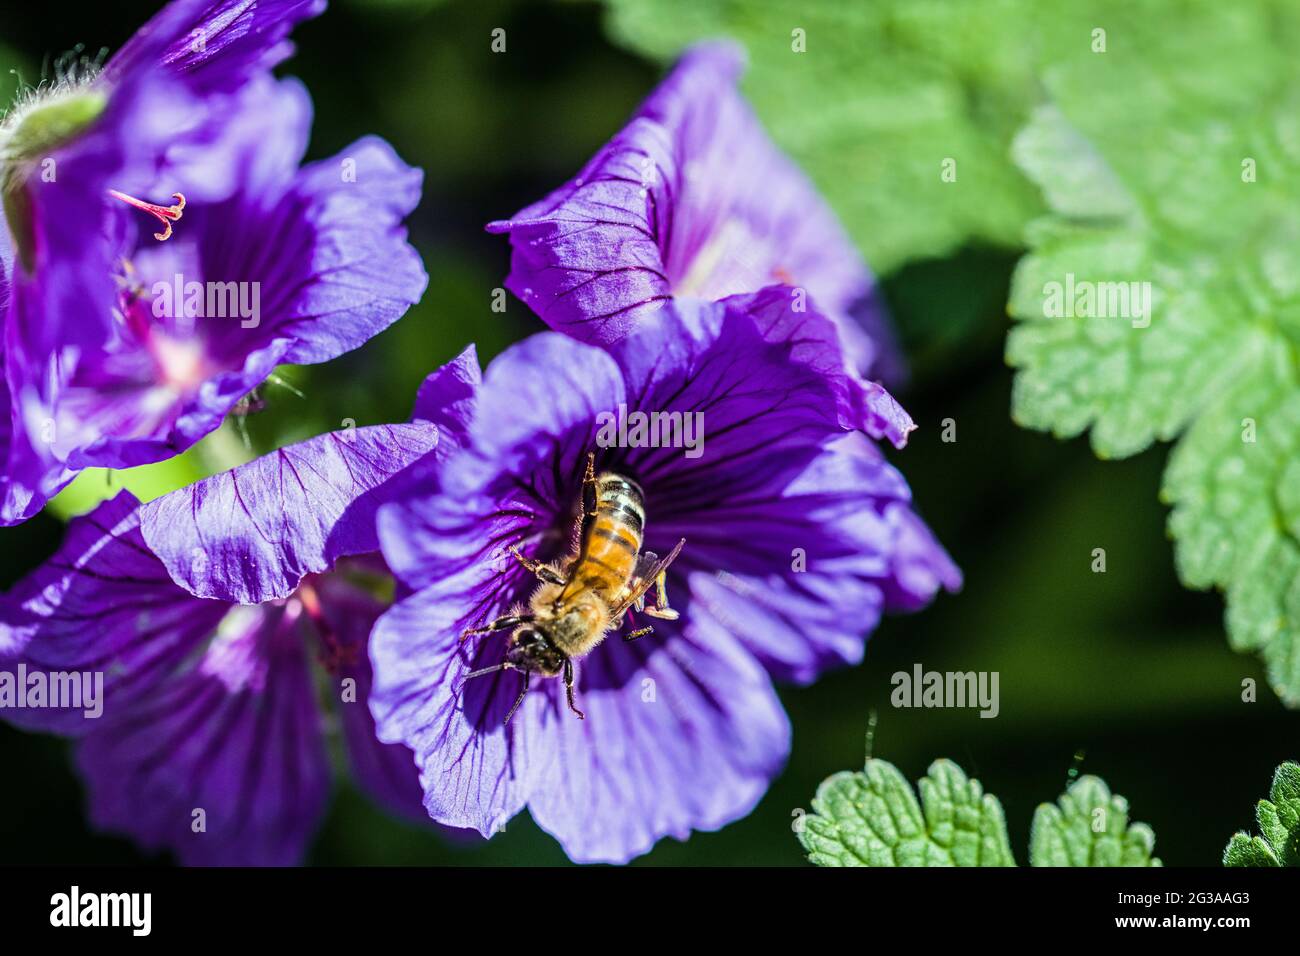 A honey bee deeply involved in extracting nectar from a blue geranium flower and also pollen for redistributing around. Stock Photo